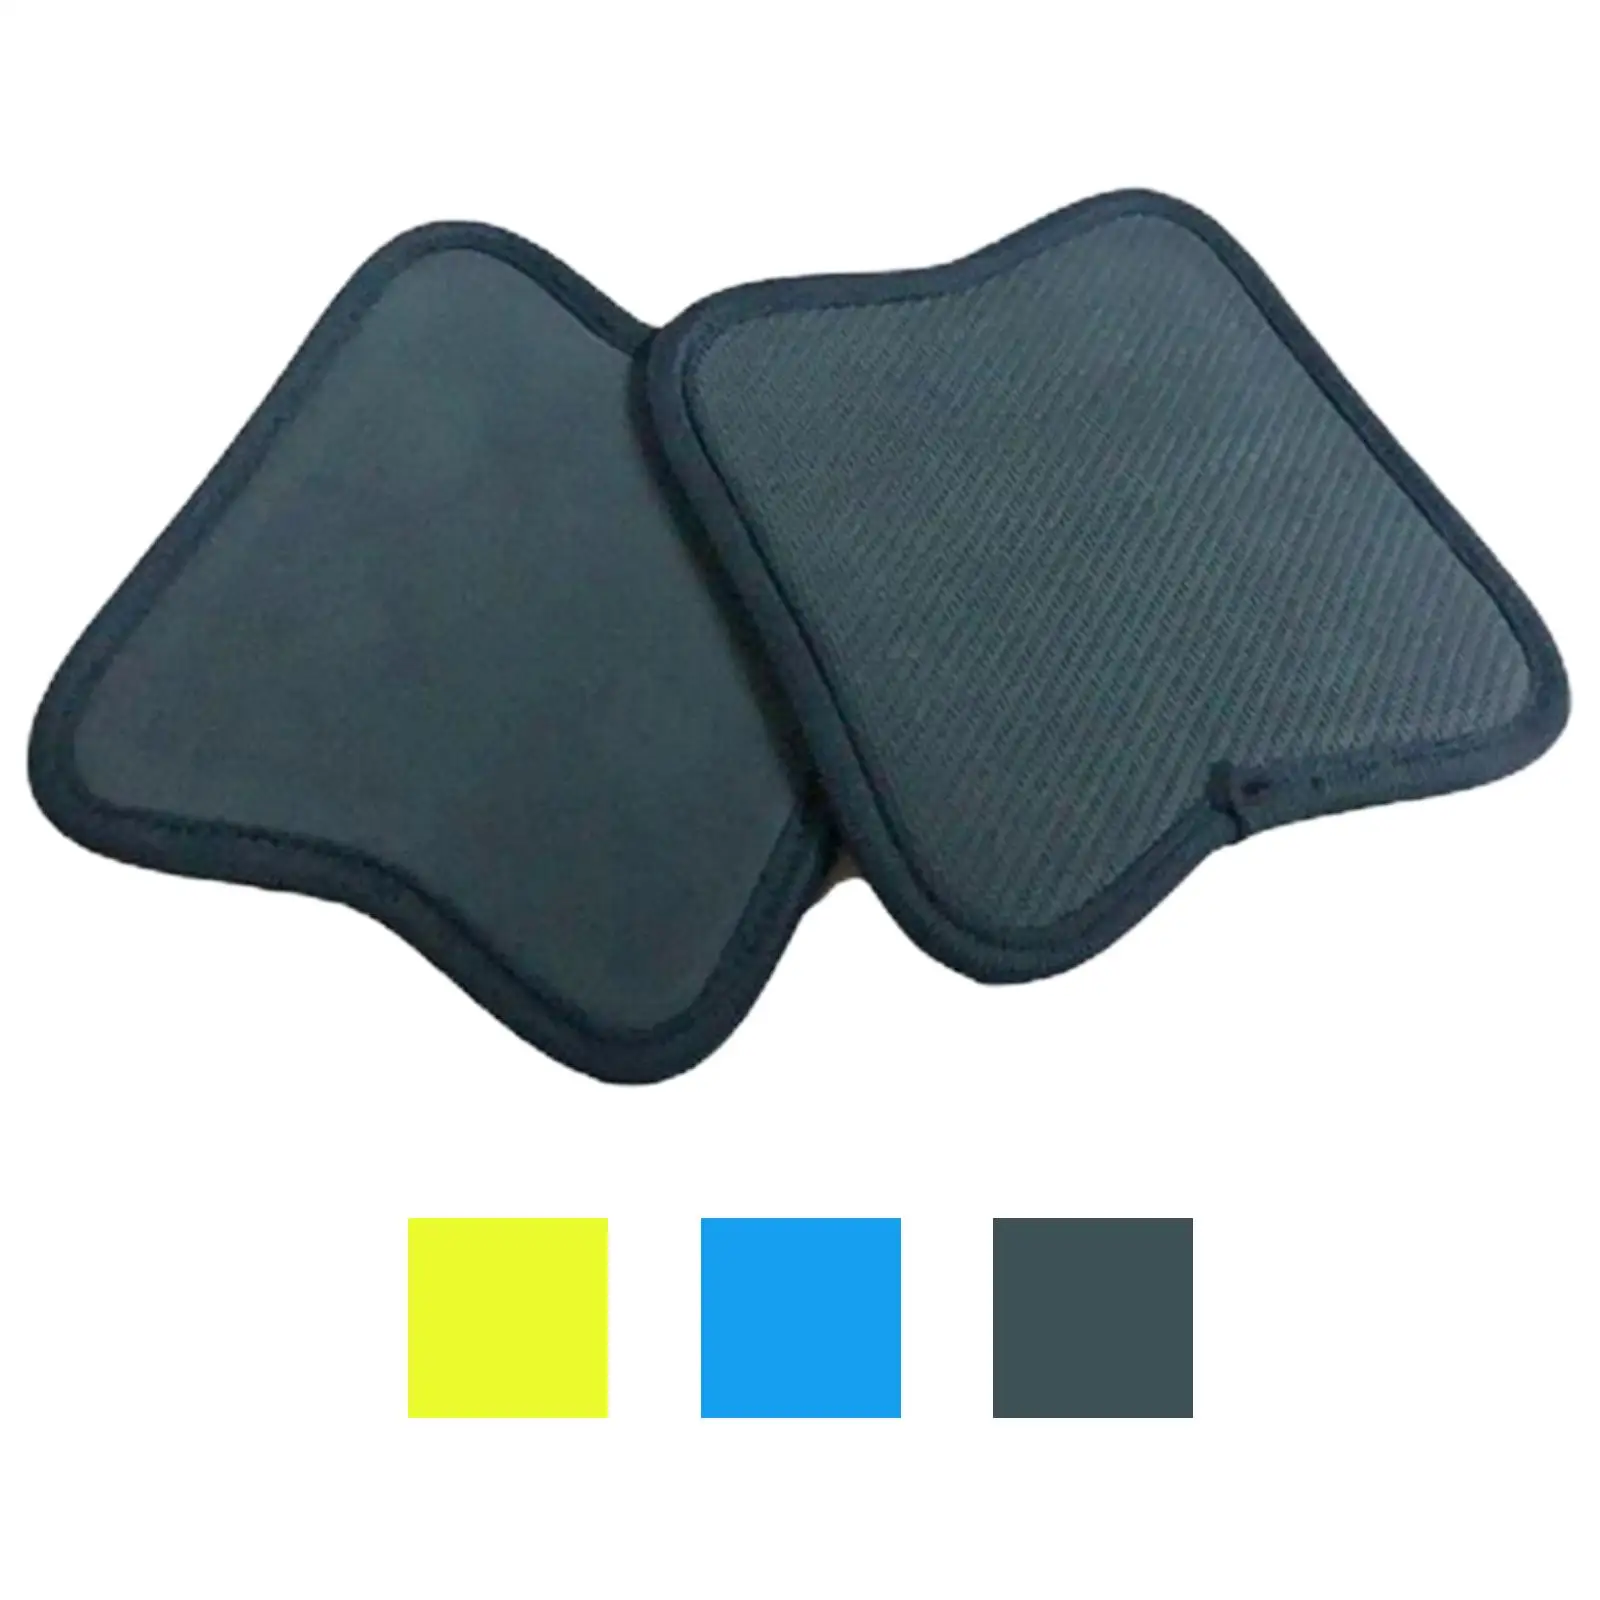 Fitness Gloves Men Women Weight Lifting Grip Pads Strength Pads Gym Pull Up Dumbbell Gym Workout Bodybuilding